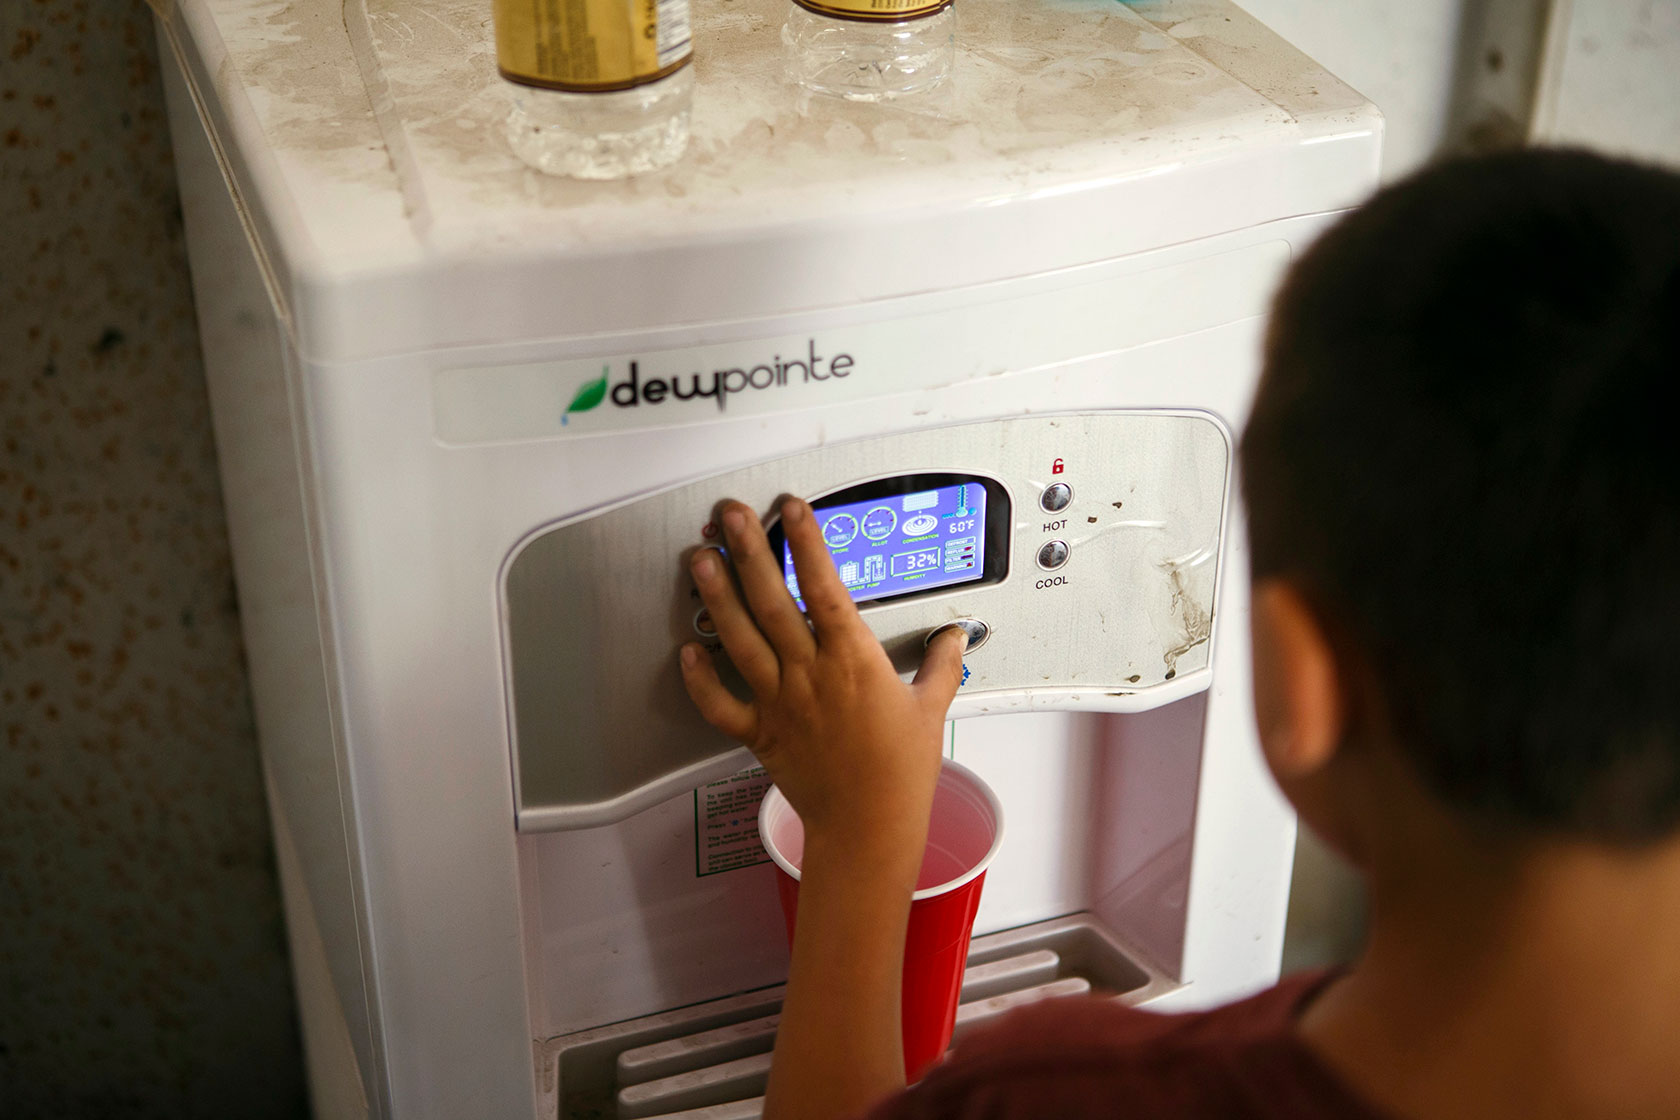 Photo shows the back of a young boy wearing a red shirt filling up a red plastic cup with water from a dispenser